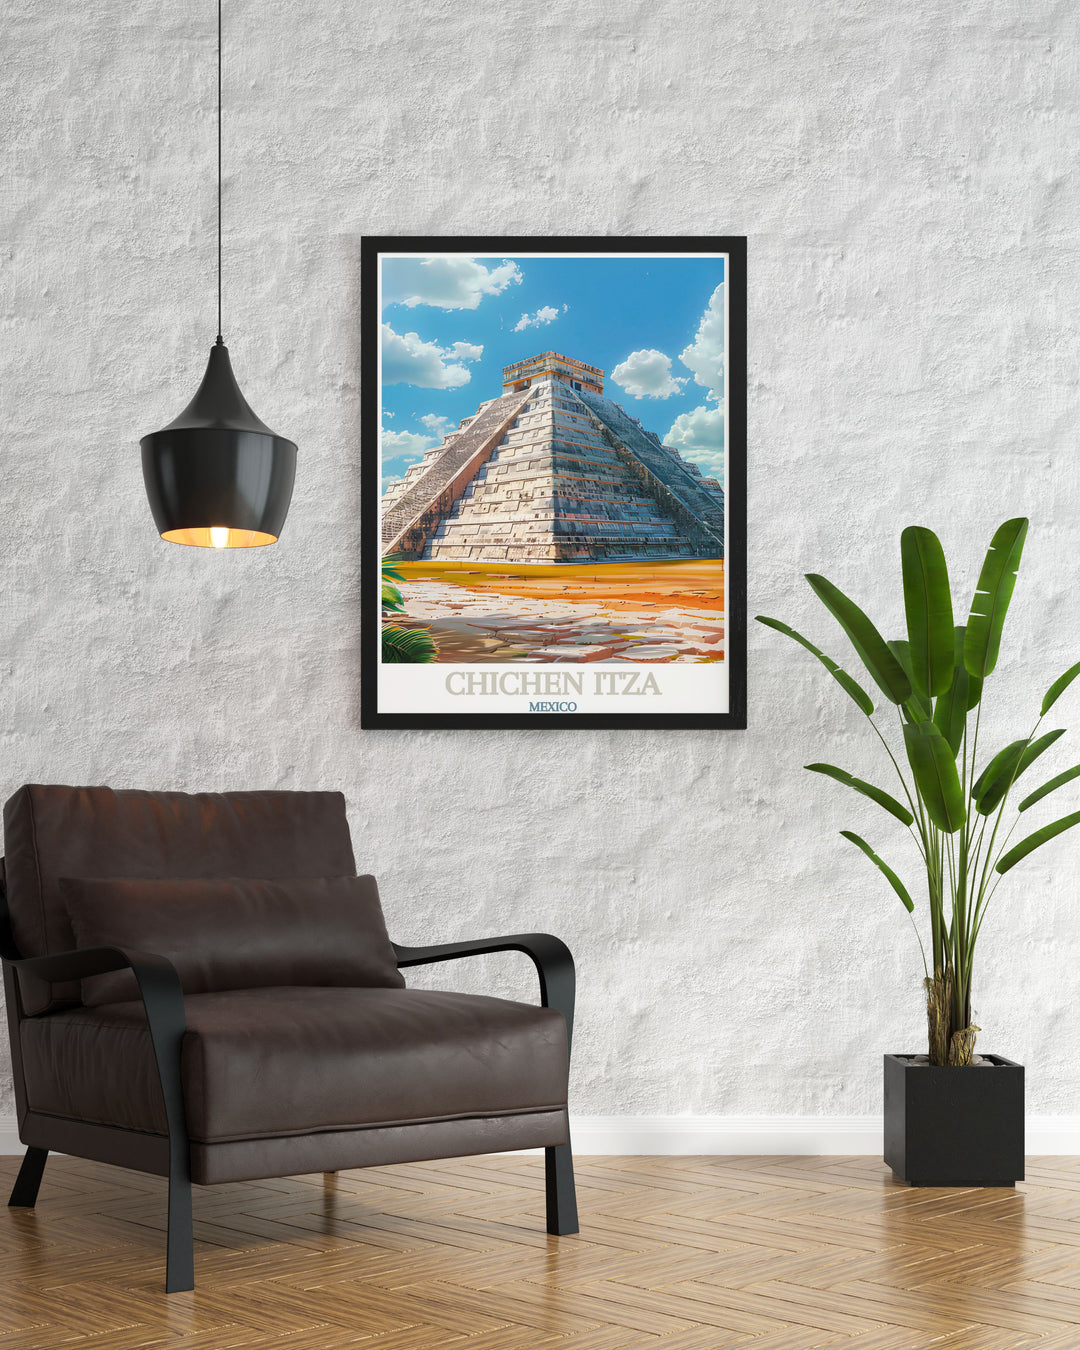 Capture the essence of Mexico with this stunning wall art print, featuring the intricate design and monumental scale of El Castillo. The majestic Chichen Itza is beautifully illustrated in this travel poster, ideal for enhancing any room with historical charm.